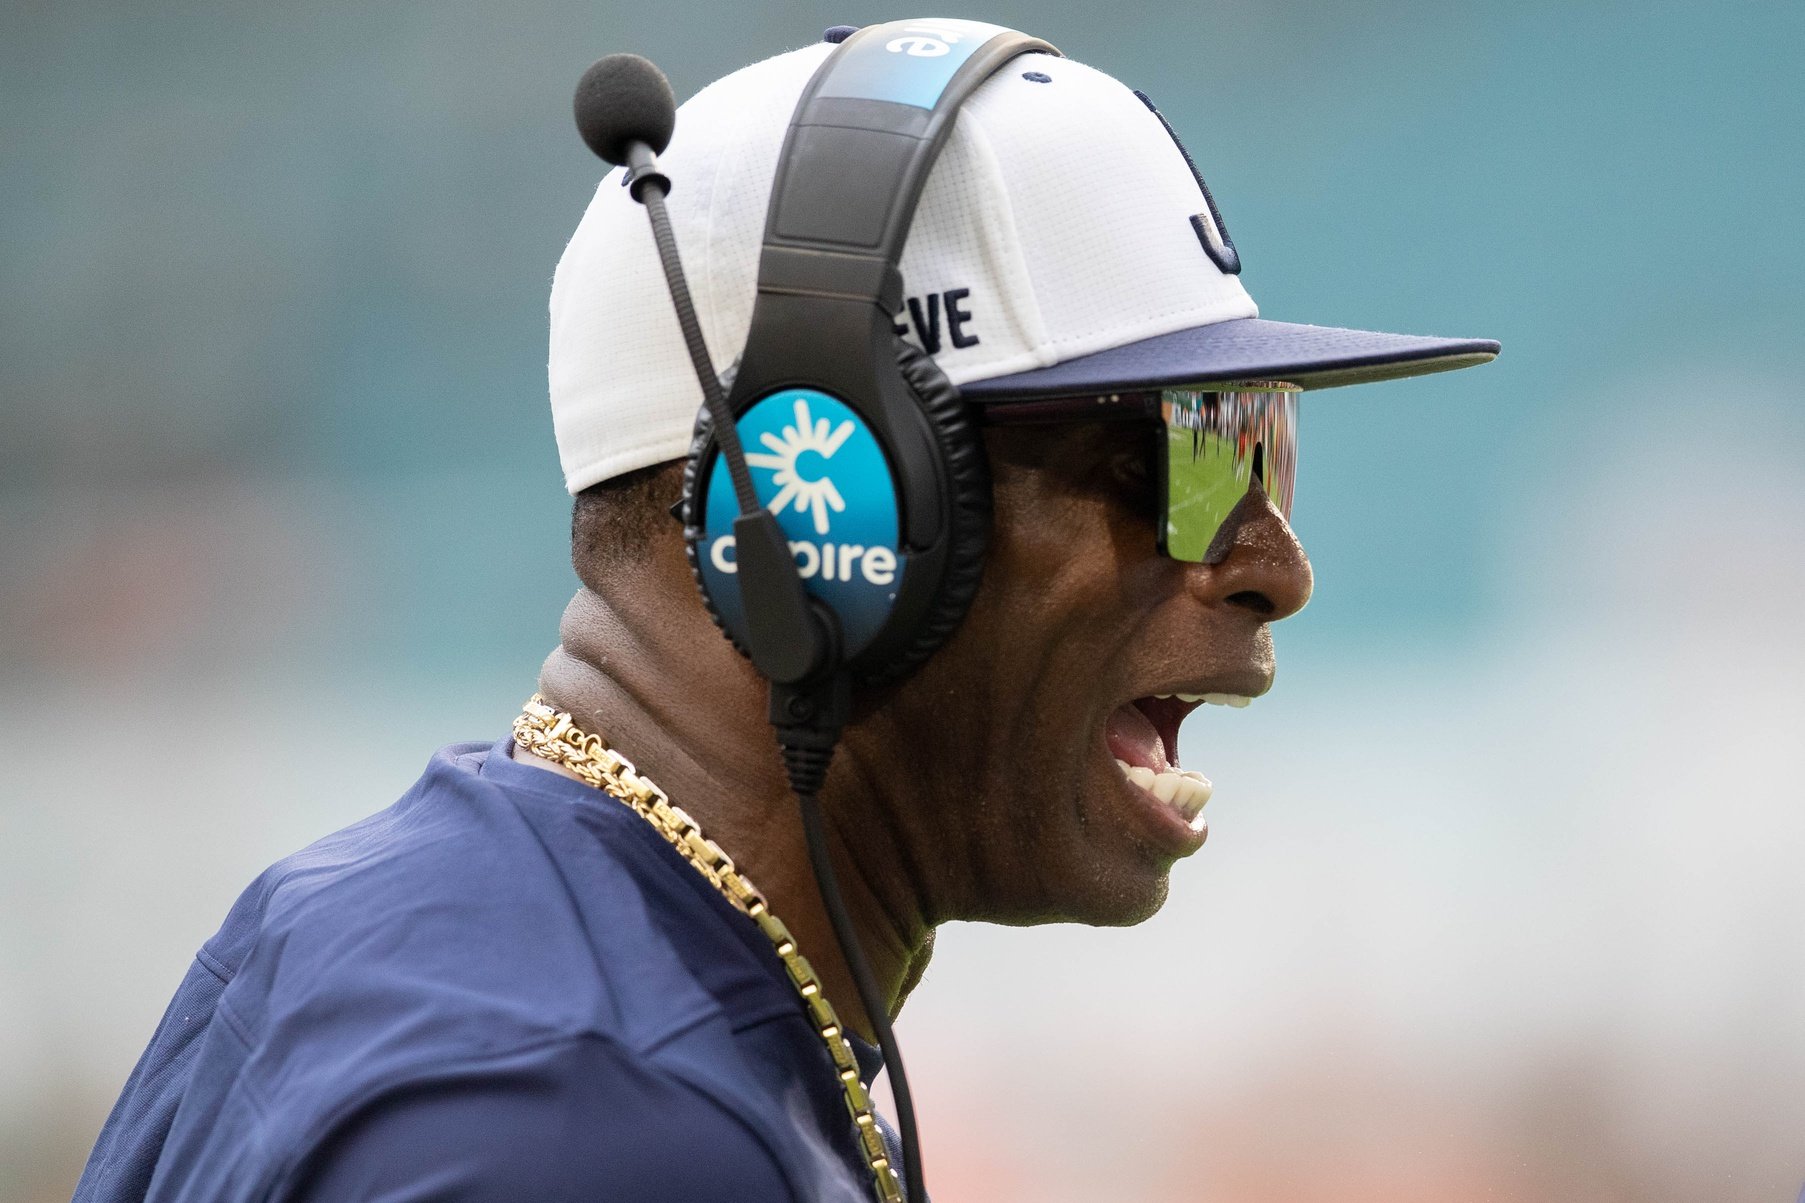 Deion Sanders: 21 amazing facts about Prime Time's two-way career